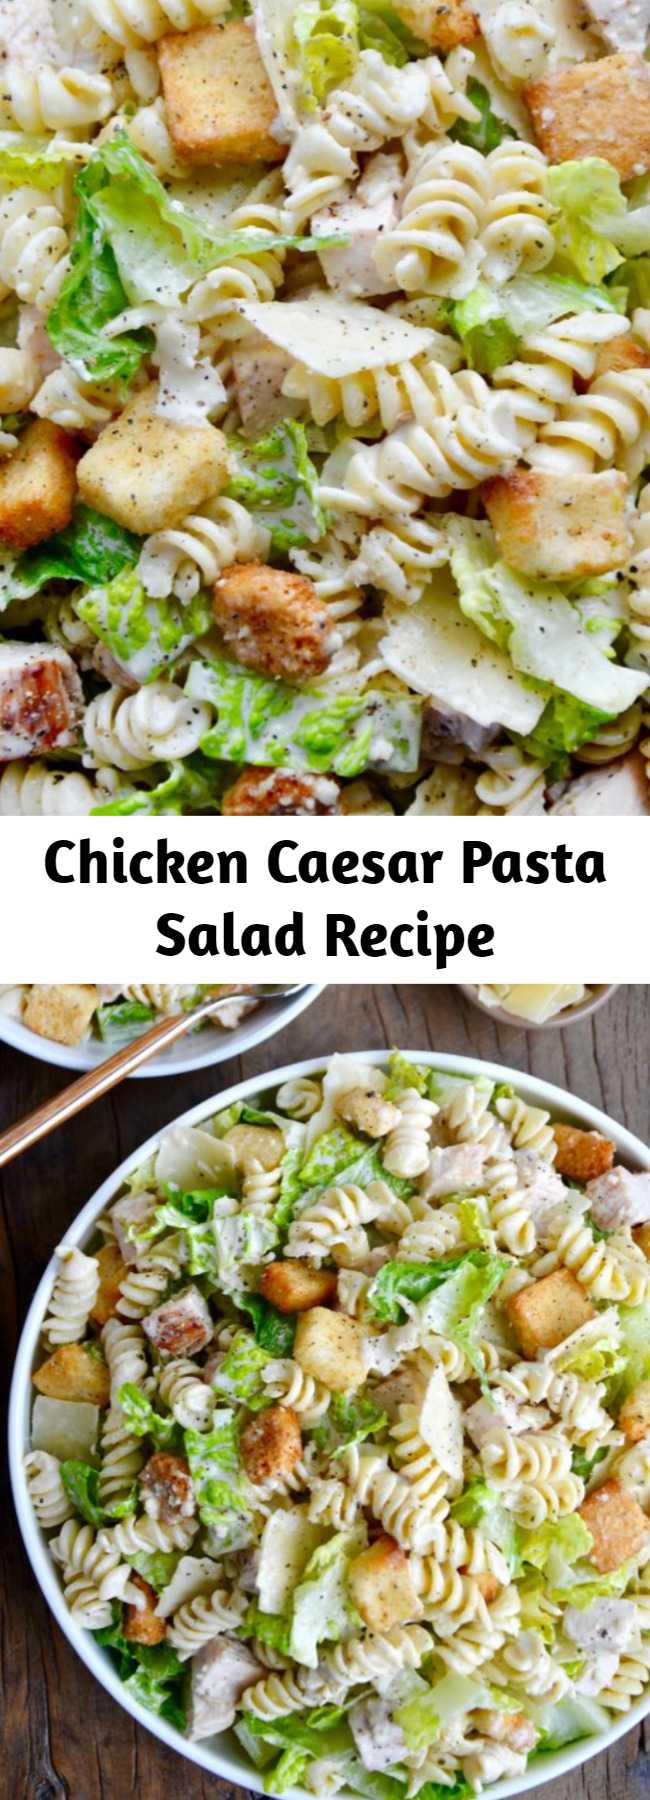 Chicken Caesar Pasta Salad Recipe - Whip up a 20-minute meal in-a-bowl with a refreshing recipe for Chicken Caesar Pasta Salad starring DIY dressing. #recipes #chickencaesar #pastasalad #picnicfoodideas #20minuterecipe #food